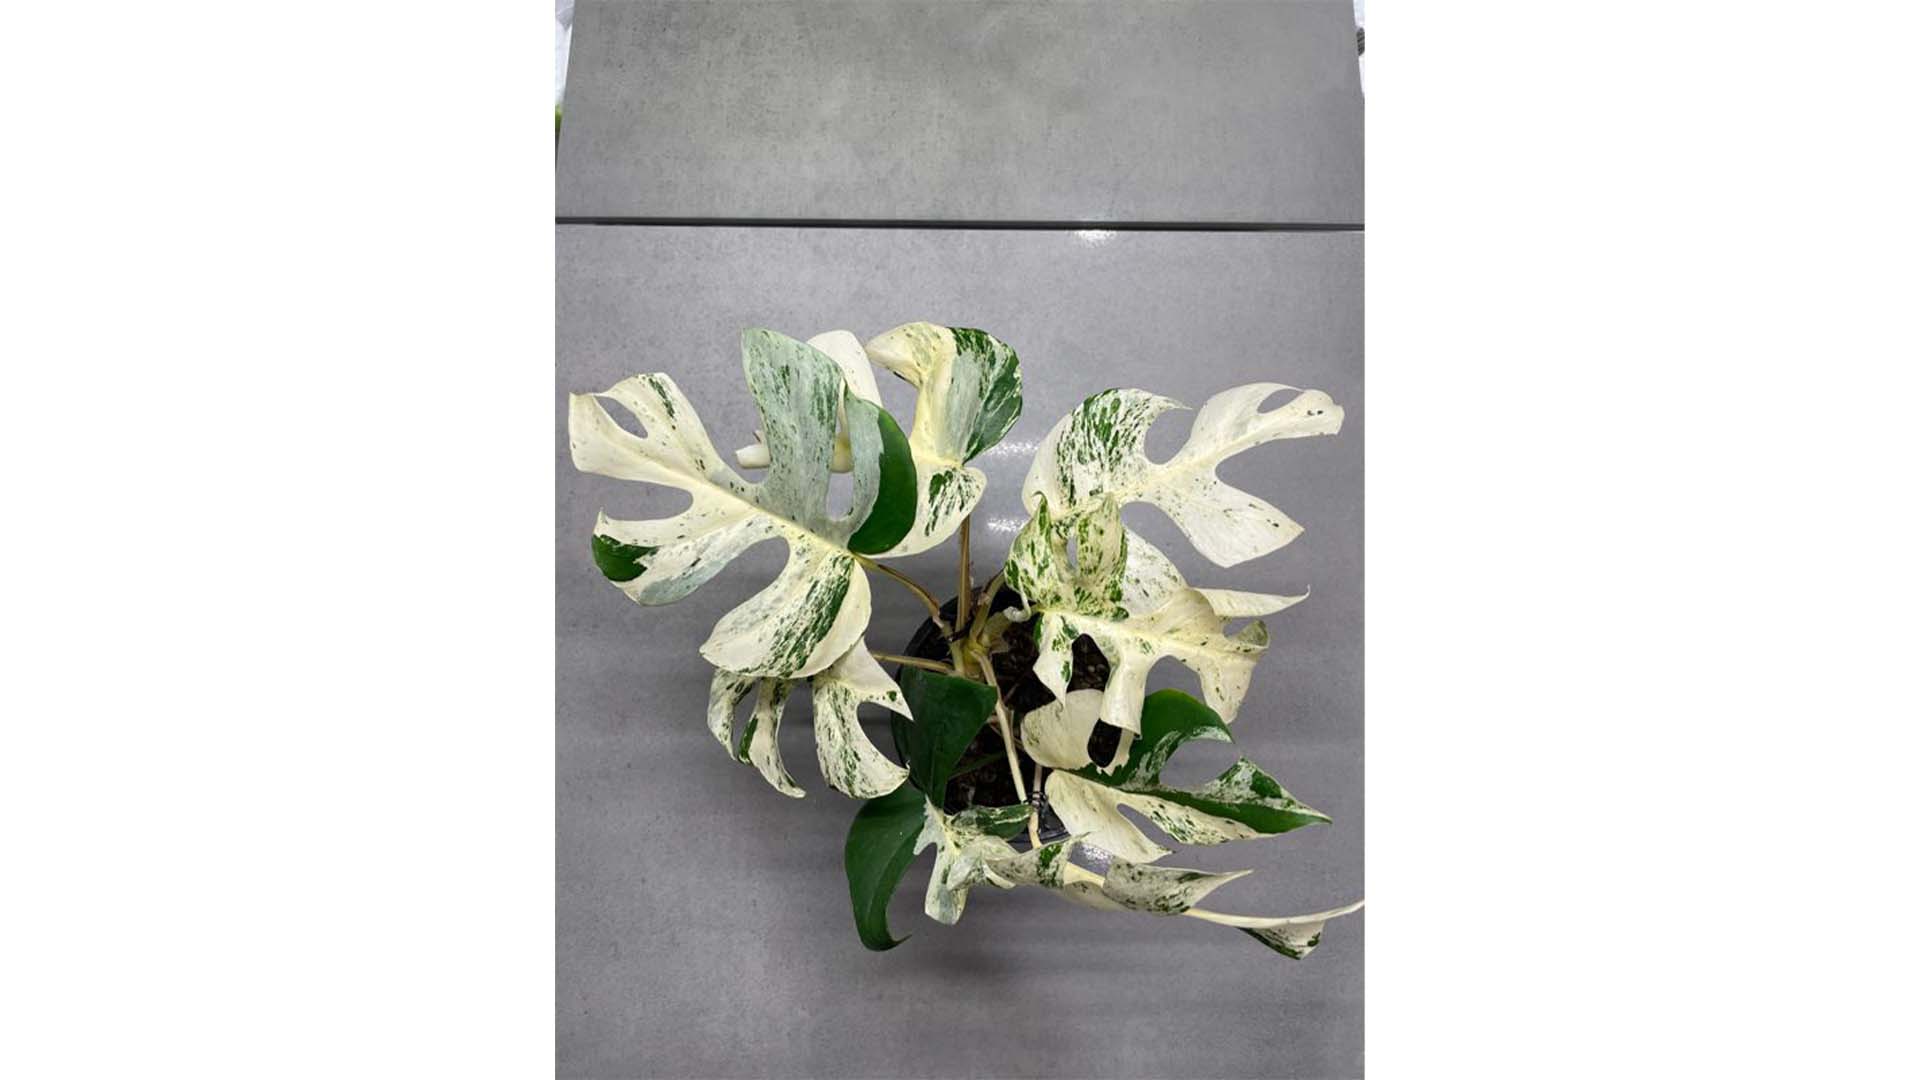 A variegated Minima house plant, sought after on Trade Me, finds a new home.